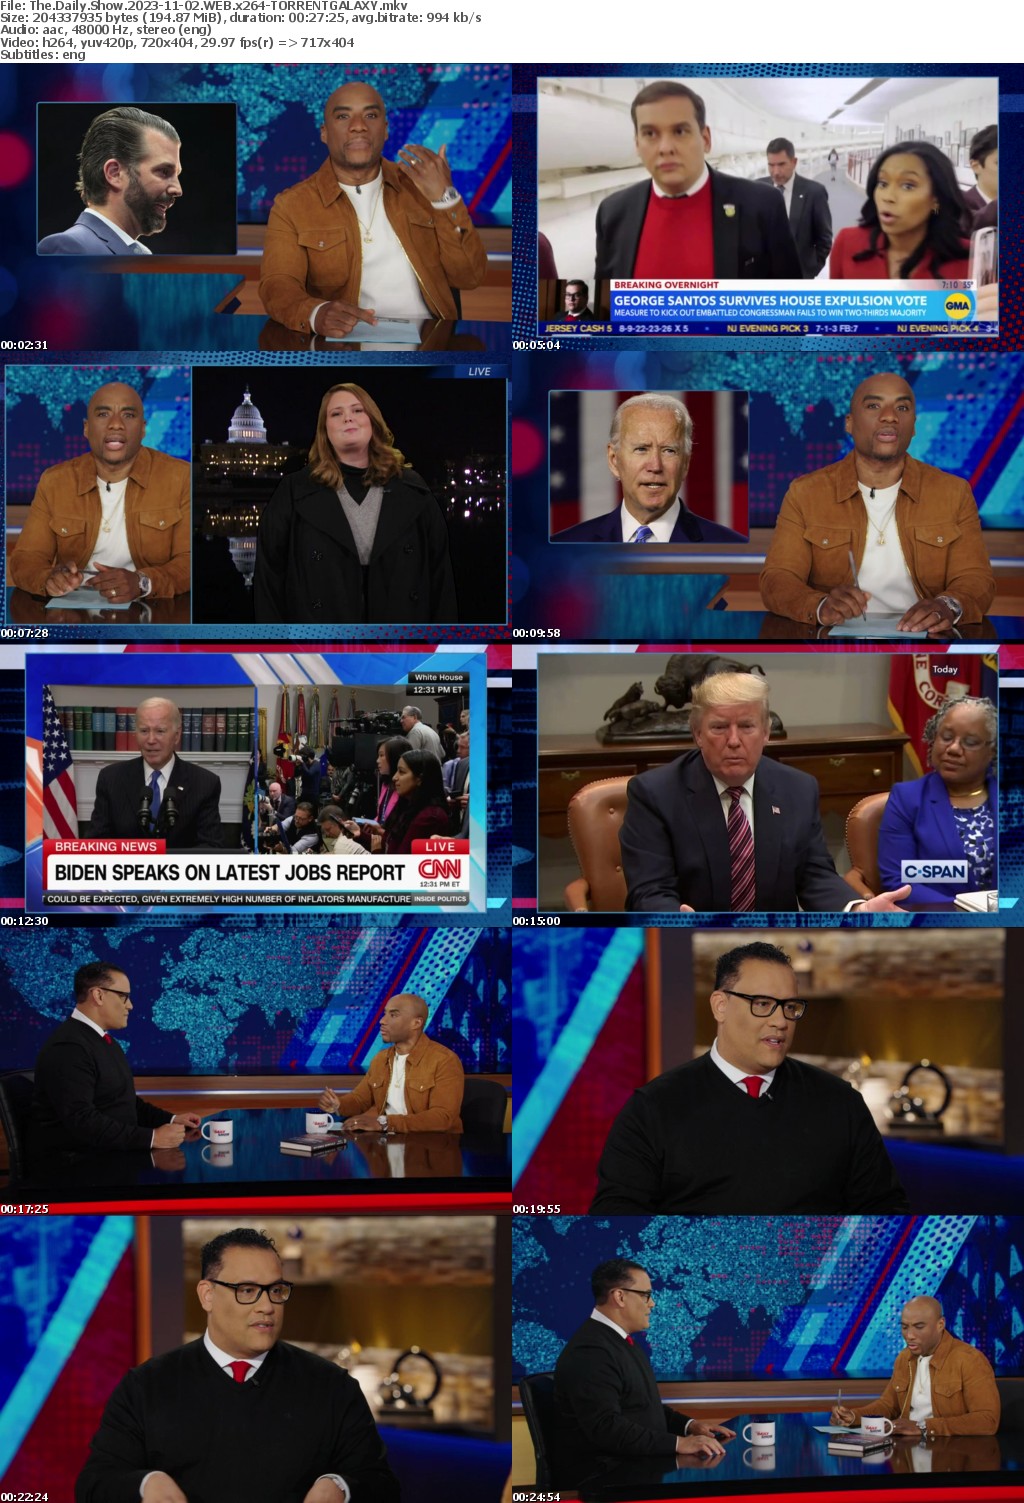 The Daily Show 2023-11-02 WEB x264-GALAXY